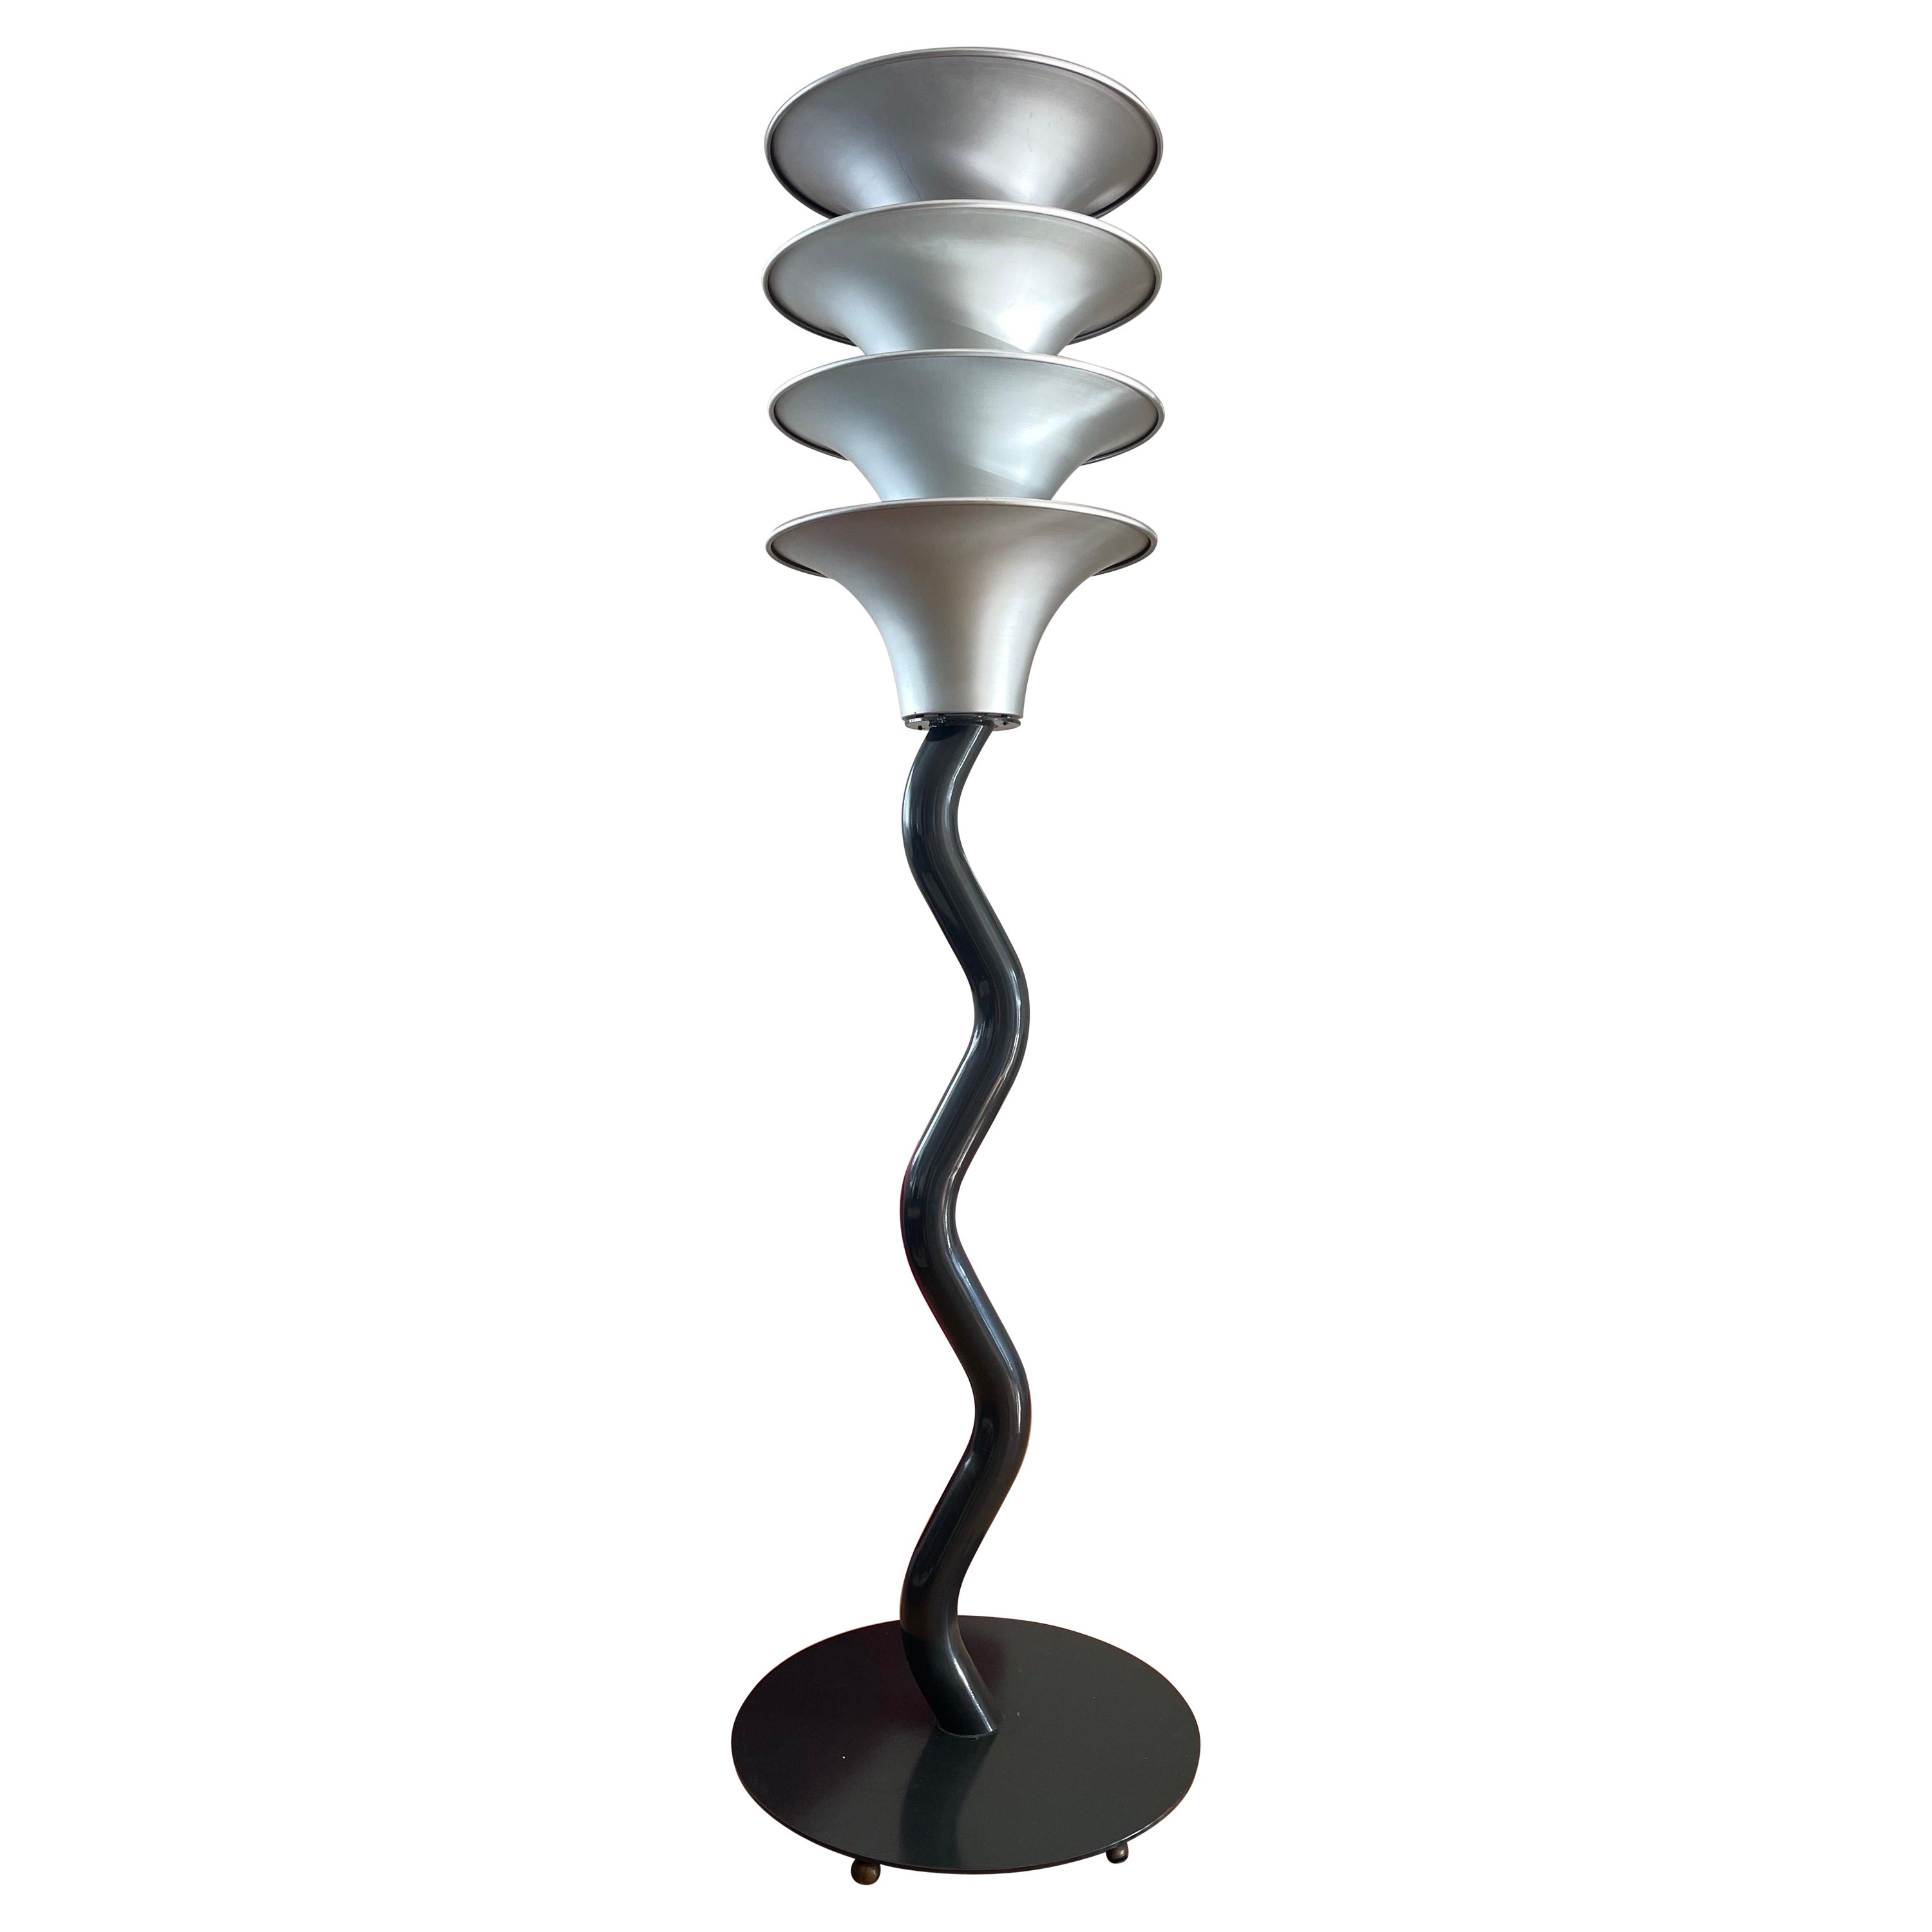 Peter Shire "Olympic Torch" Floor Lamp, 1980's For Sale